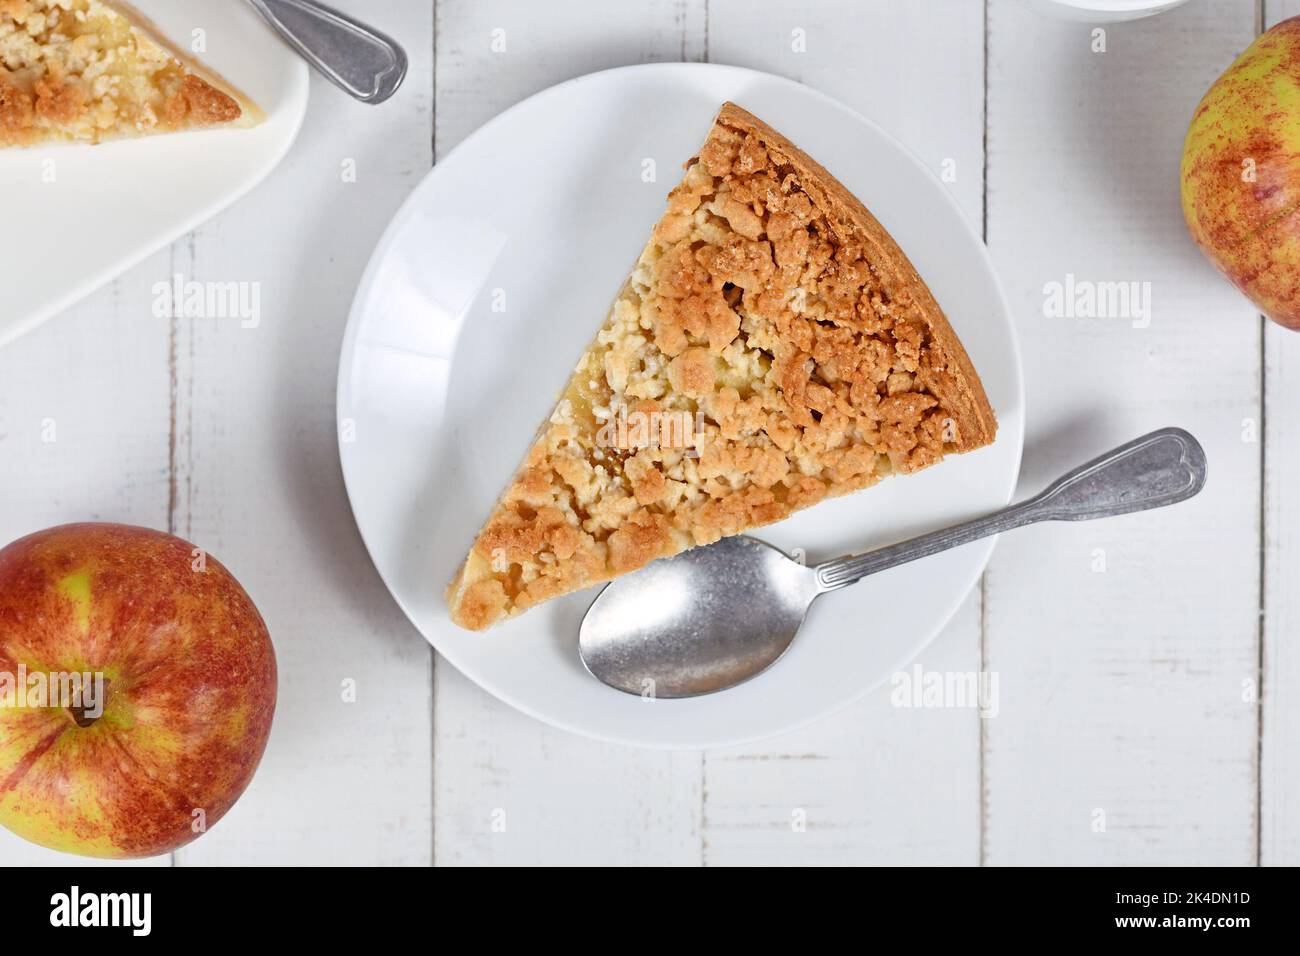 Top view of slice of traditional European apple pie with topping crumbles called 'Streusel' Stock Photo